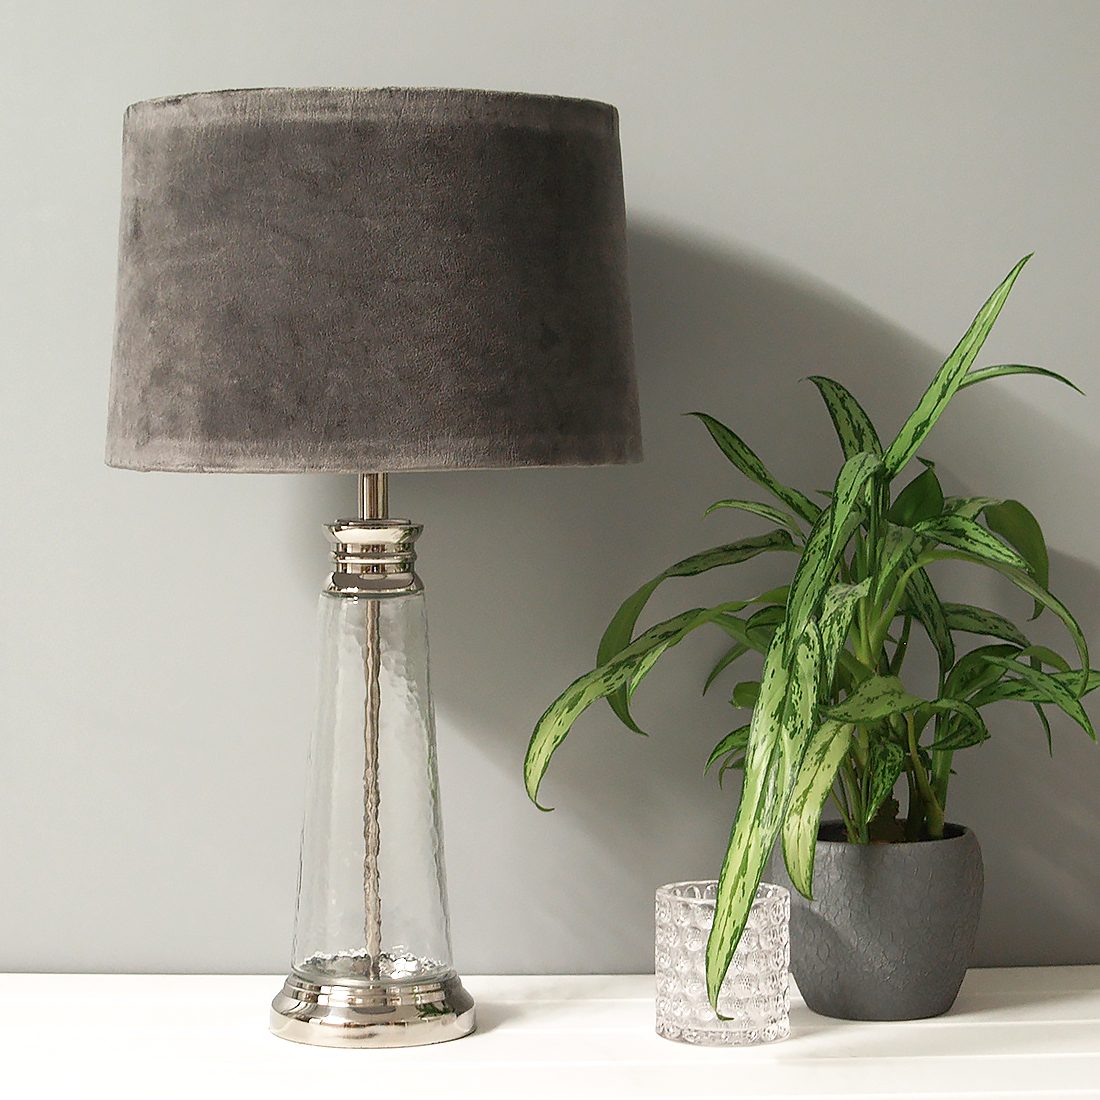 Textured Glass Table Lamp With Grey, Tall Silver Table Lamp Base